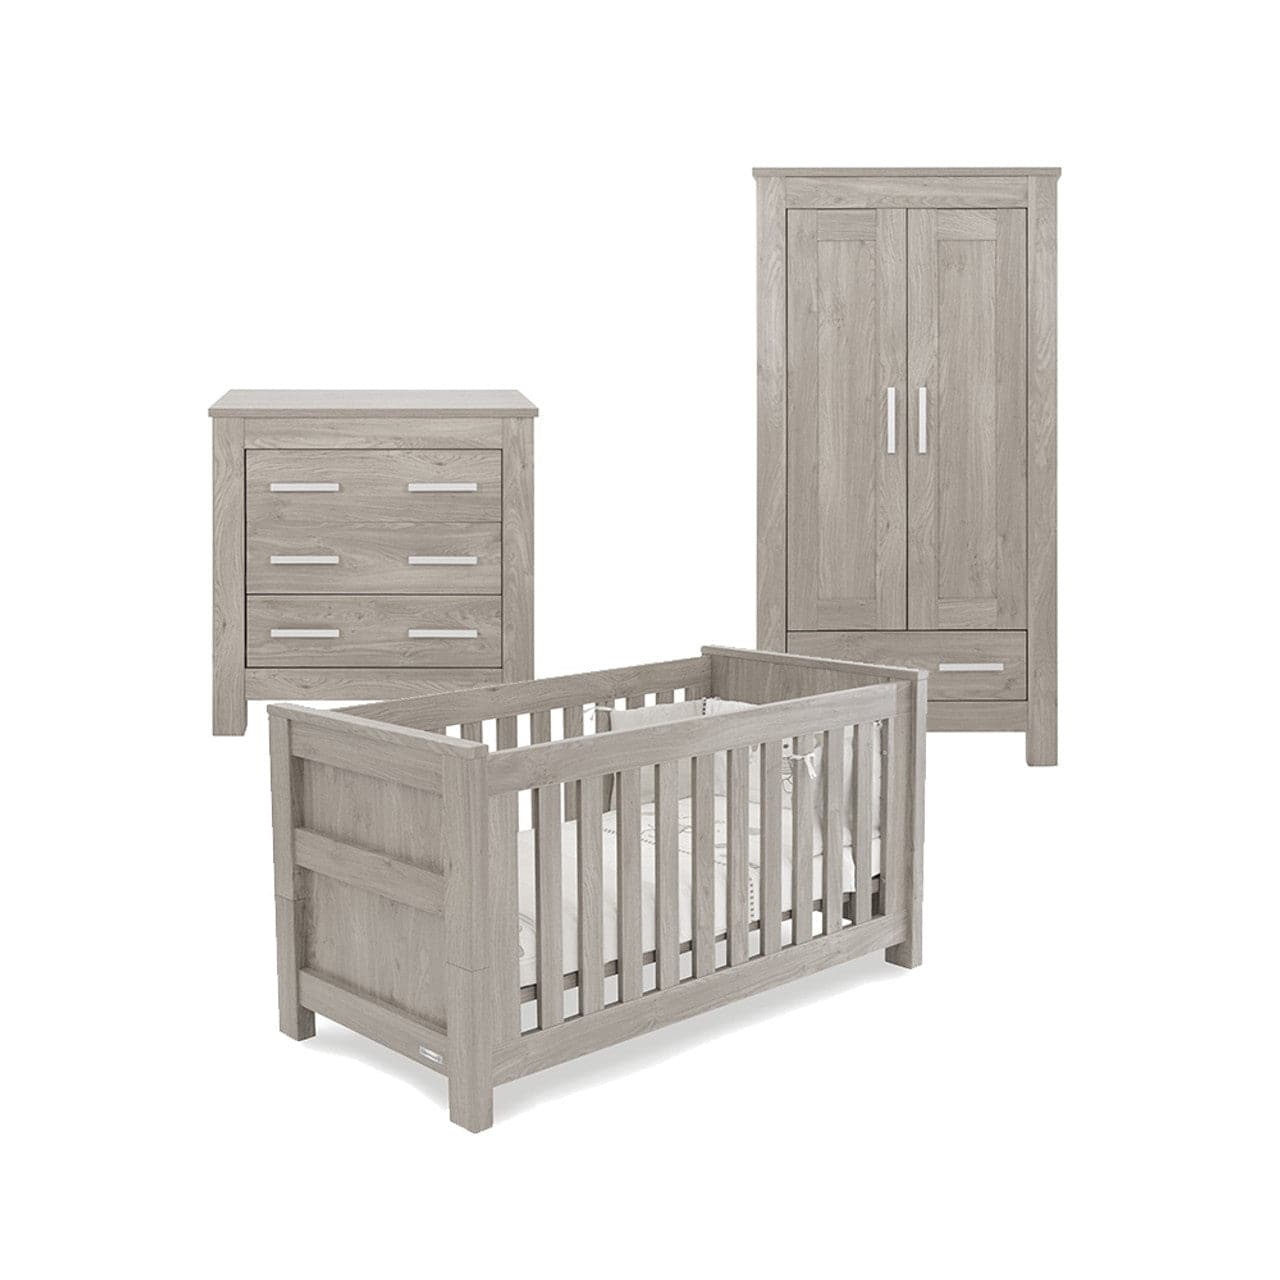 Babystyle Bordeaux Ash Furniture + FREE Sprung Mattress - 3 Piece Room Set - For Your Little One